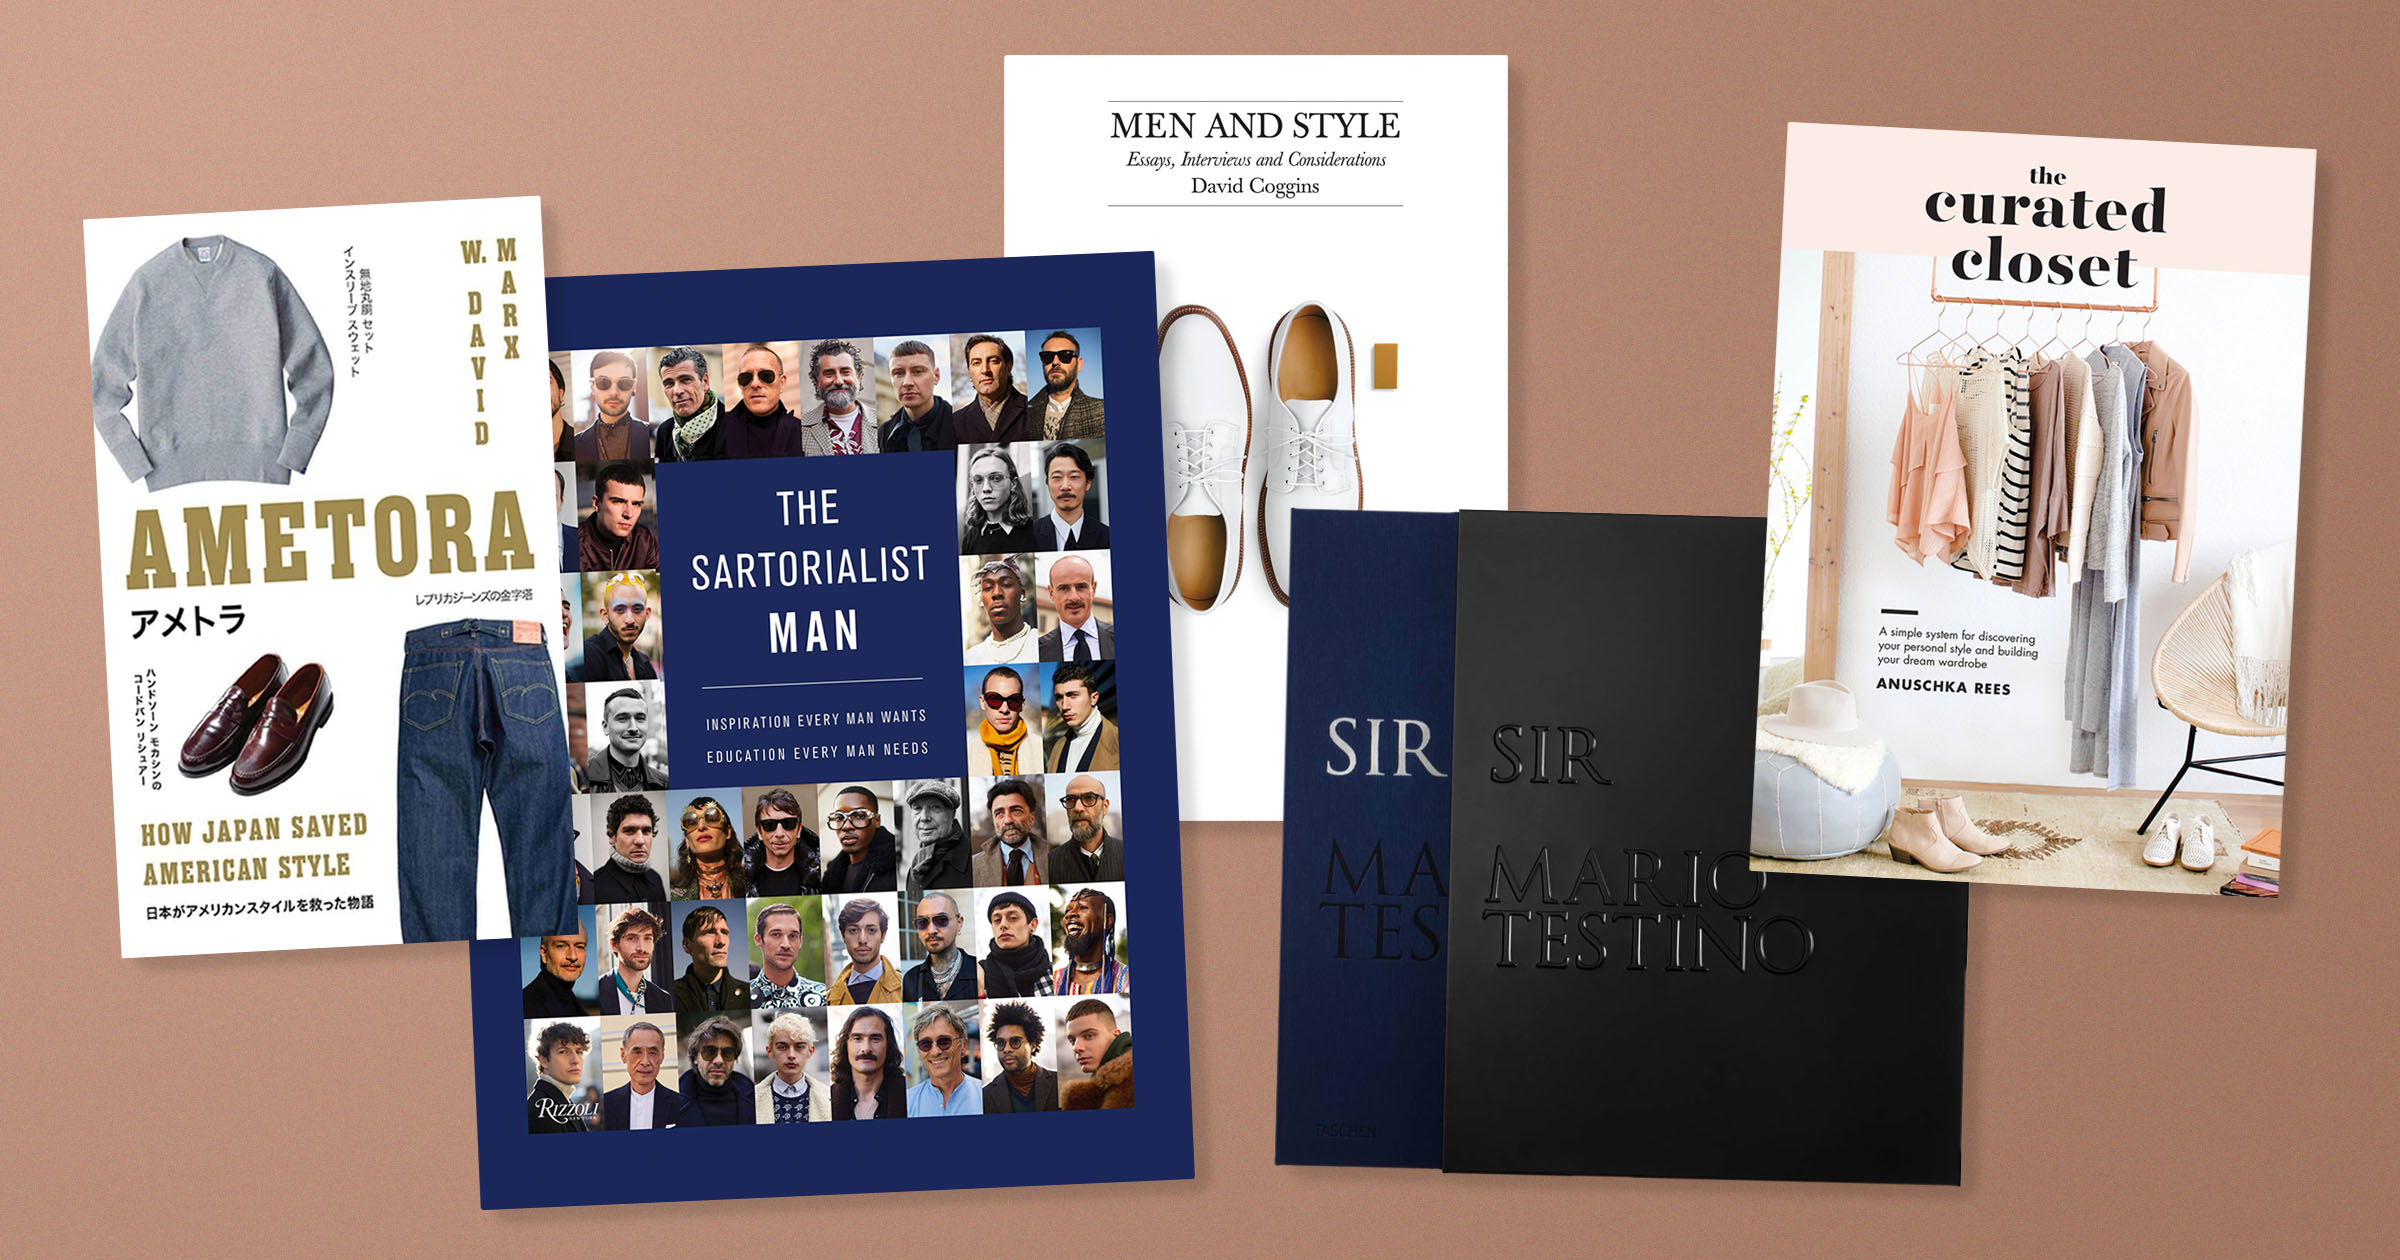 17 Of the BEST Books on Personal Style For Men